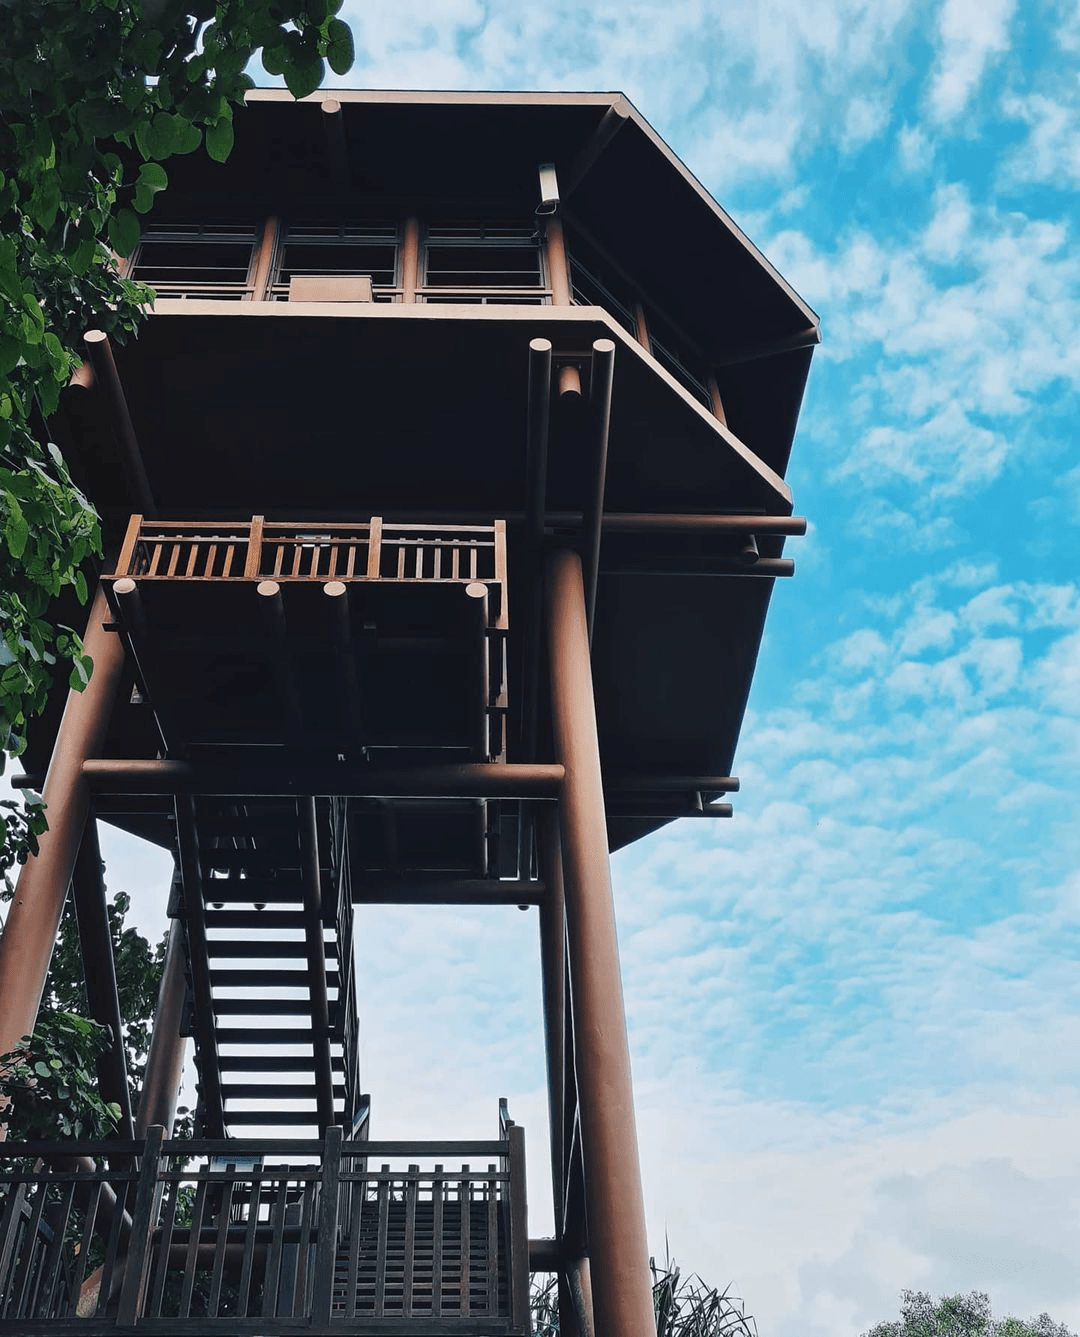 Image of Aerie Tower at Sungei Buloh